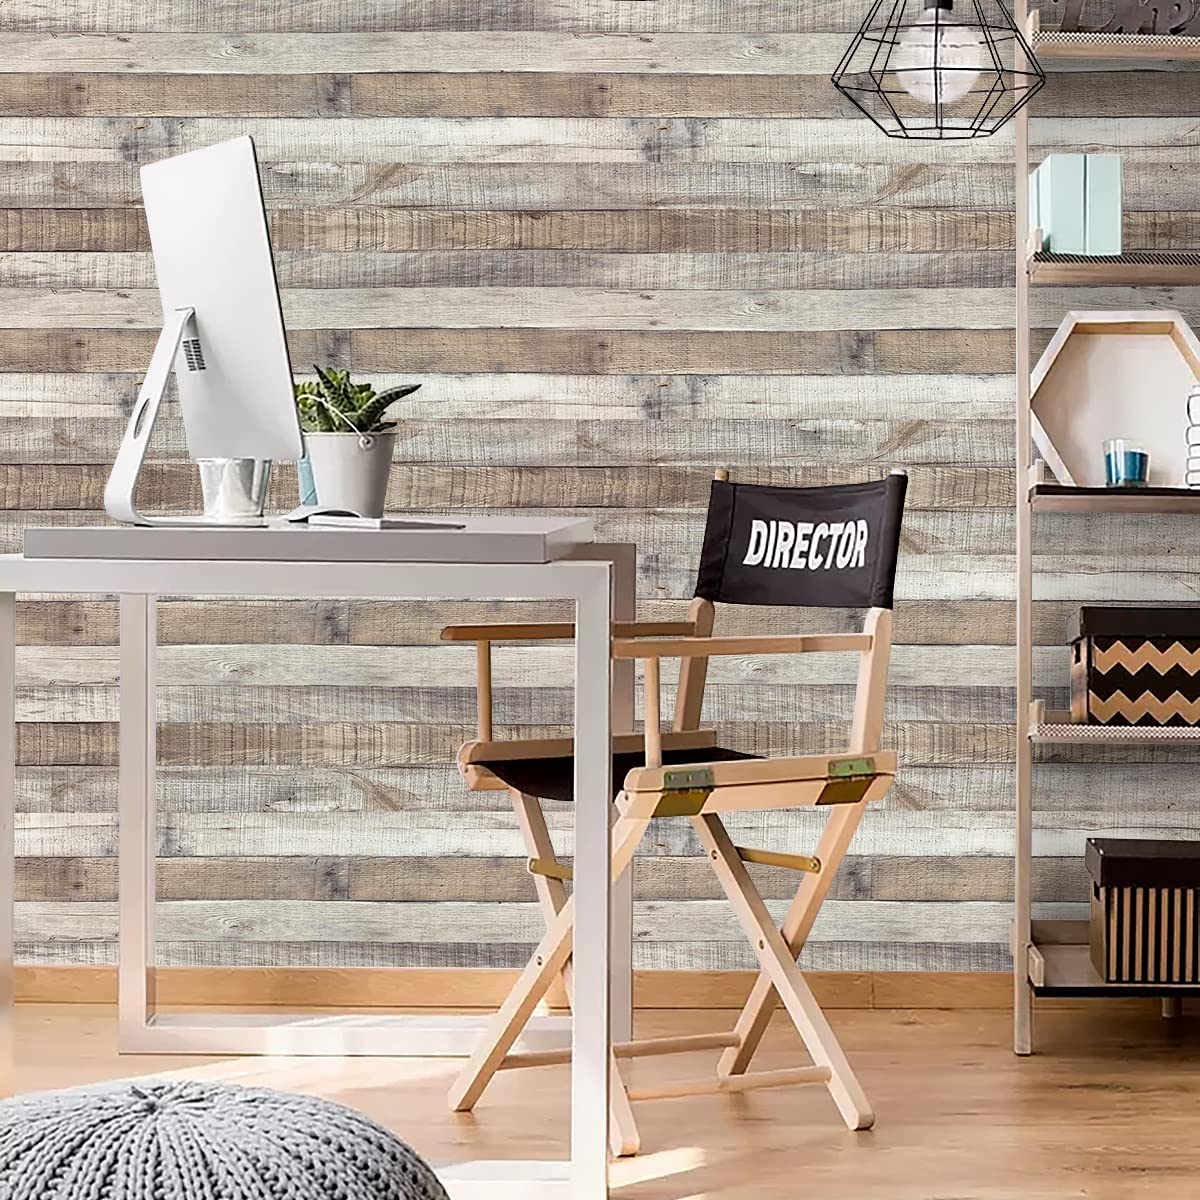 qianglive Rustic Wood Wallpaper Grain Paper Faux Stick and Peel Vintage Distressed Reclaimed Self Adhesive Removable Vinyl Home